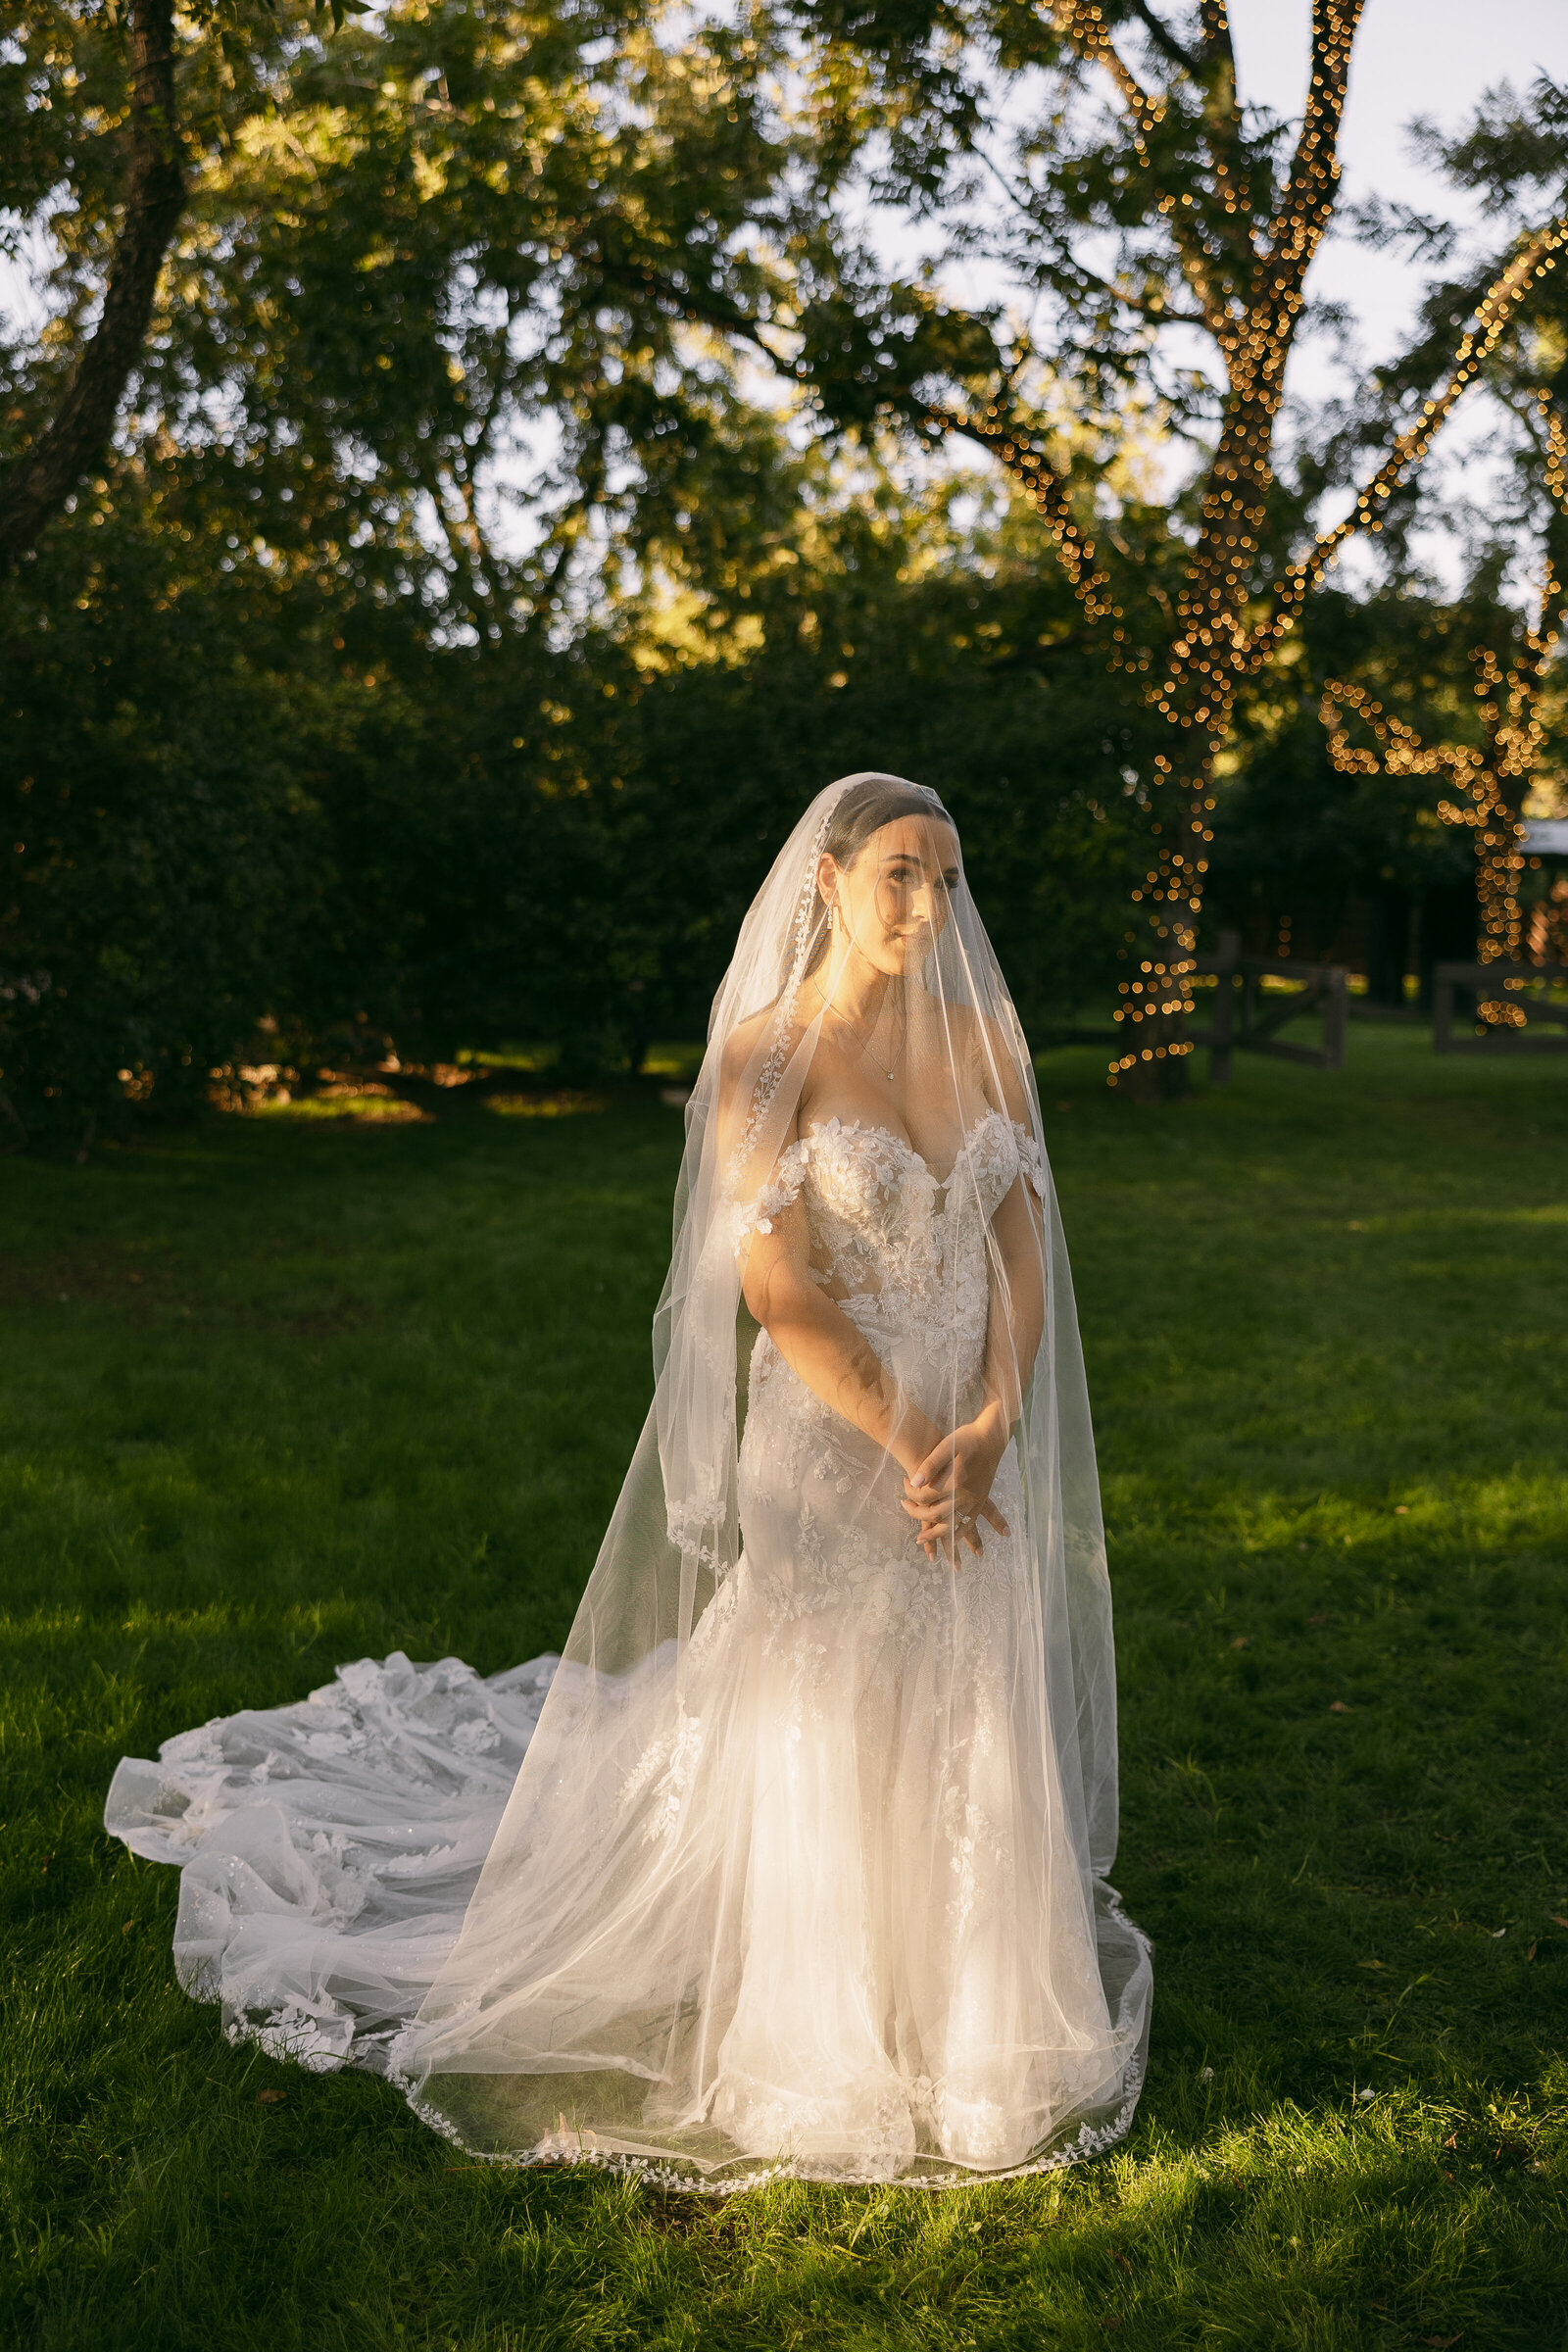 A bride standing in a field with a veil over her.